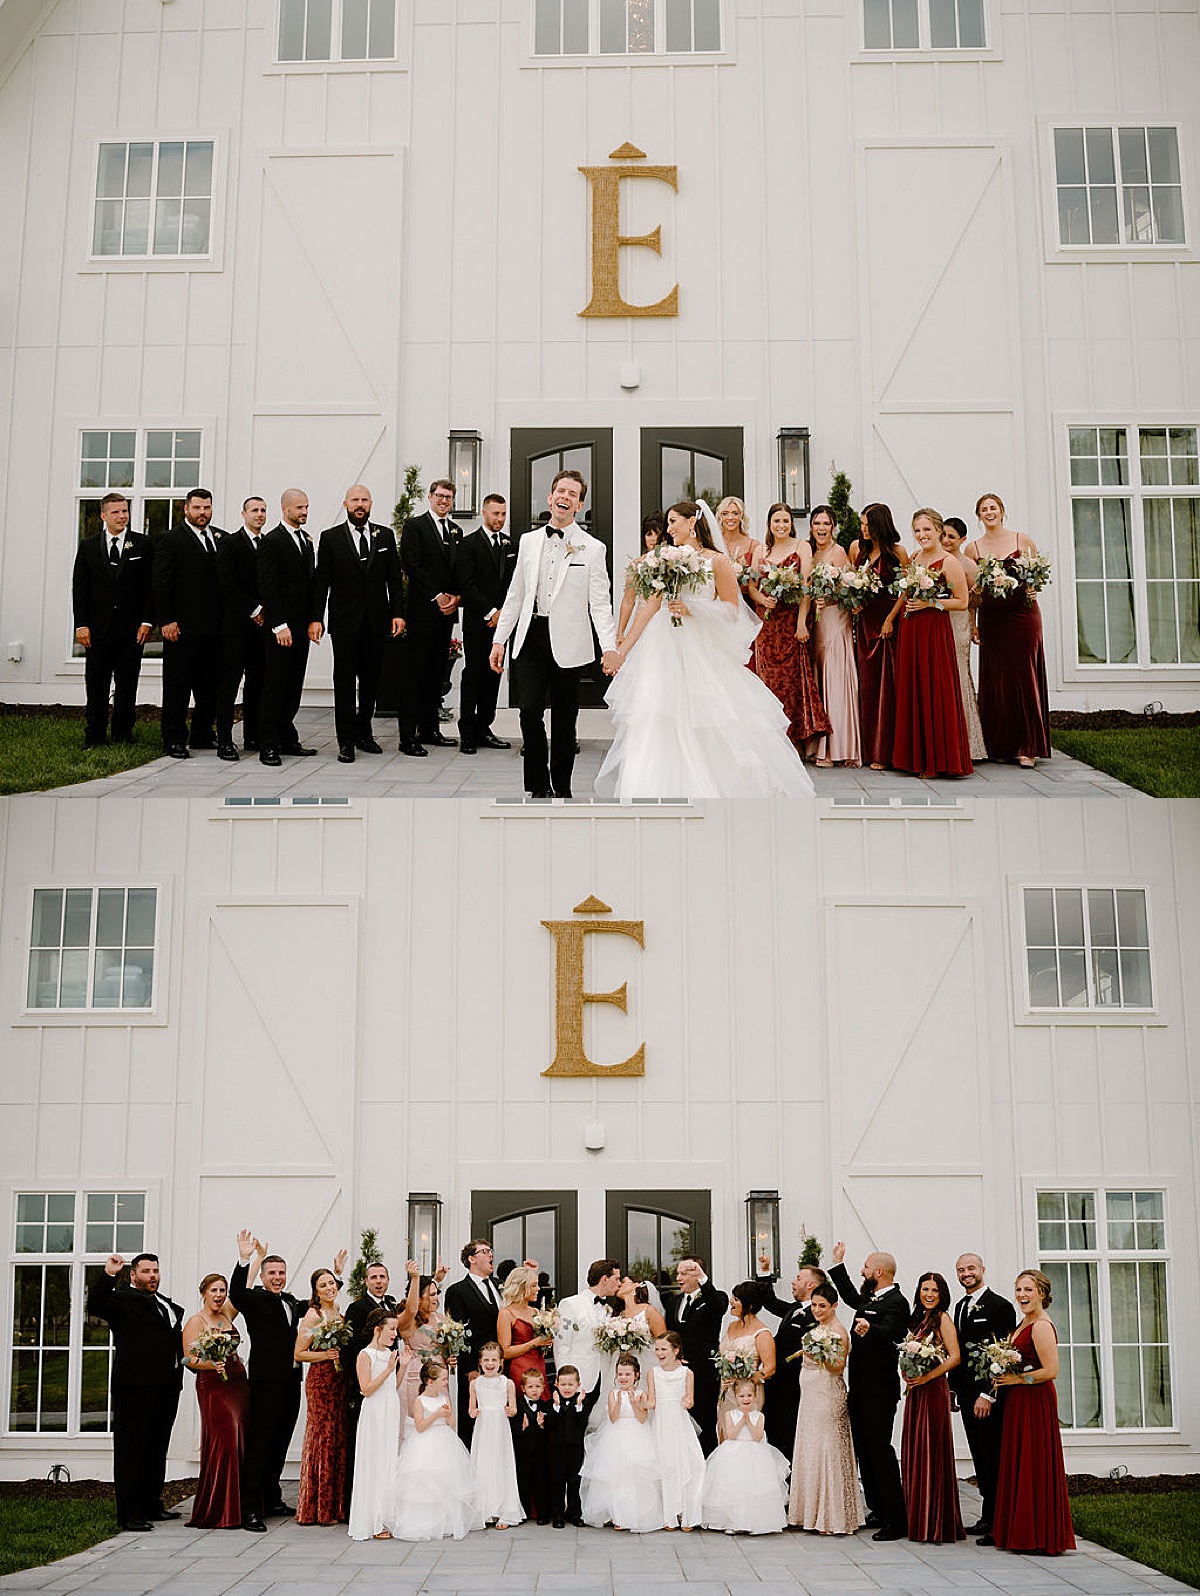 bride in tulle gown and groom in white jacket pose with wedding party in burgundy and champagne gowns before romantic Etre Farms summer wedding